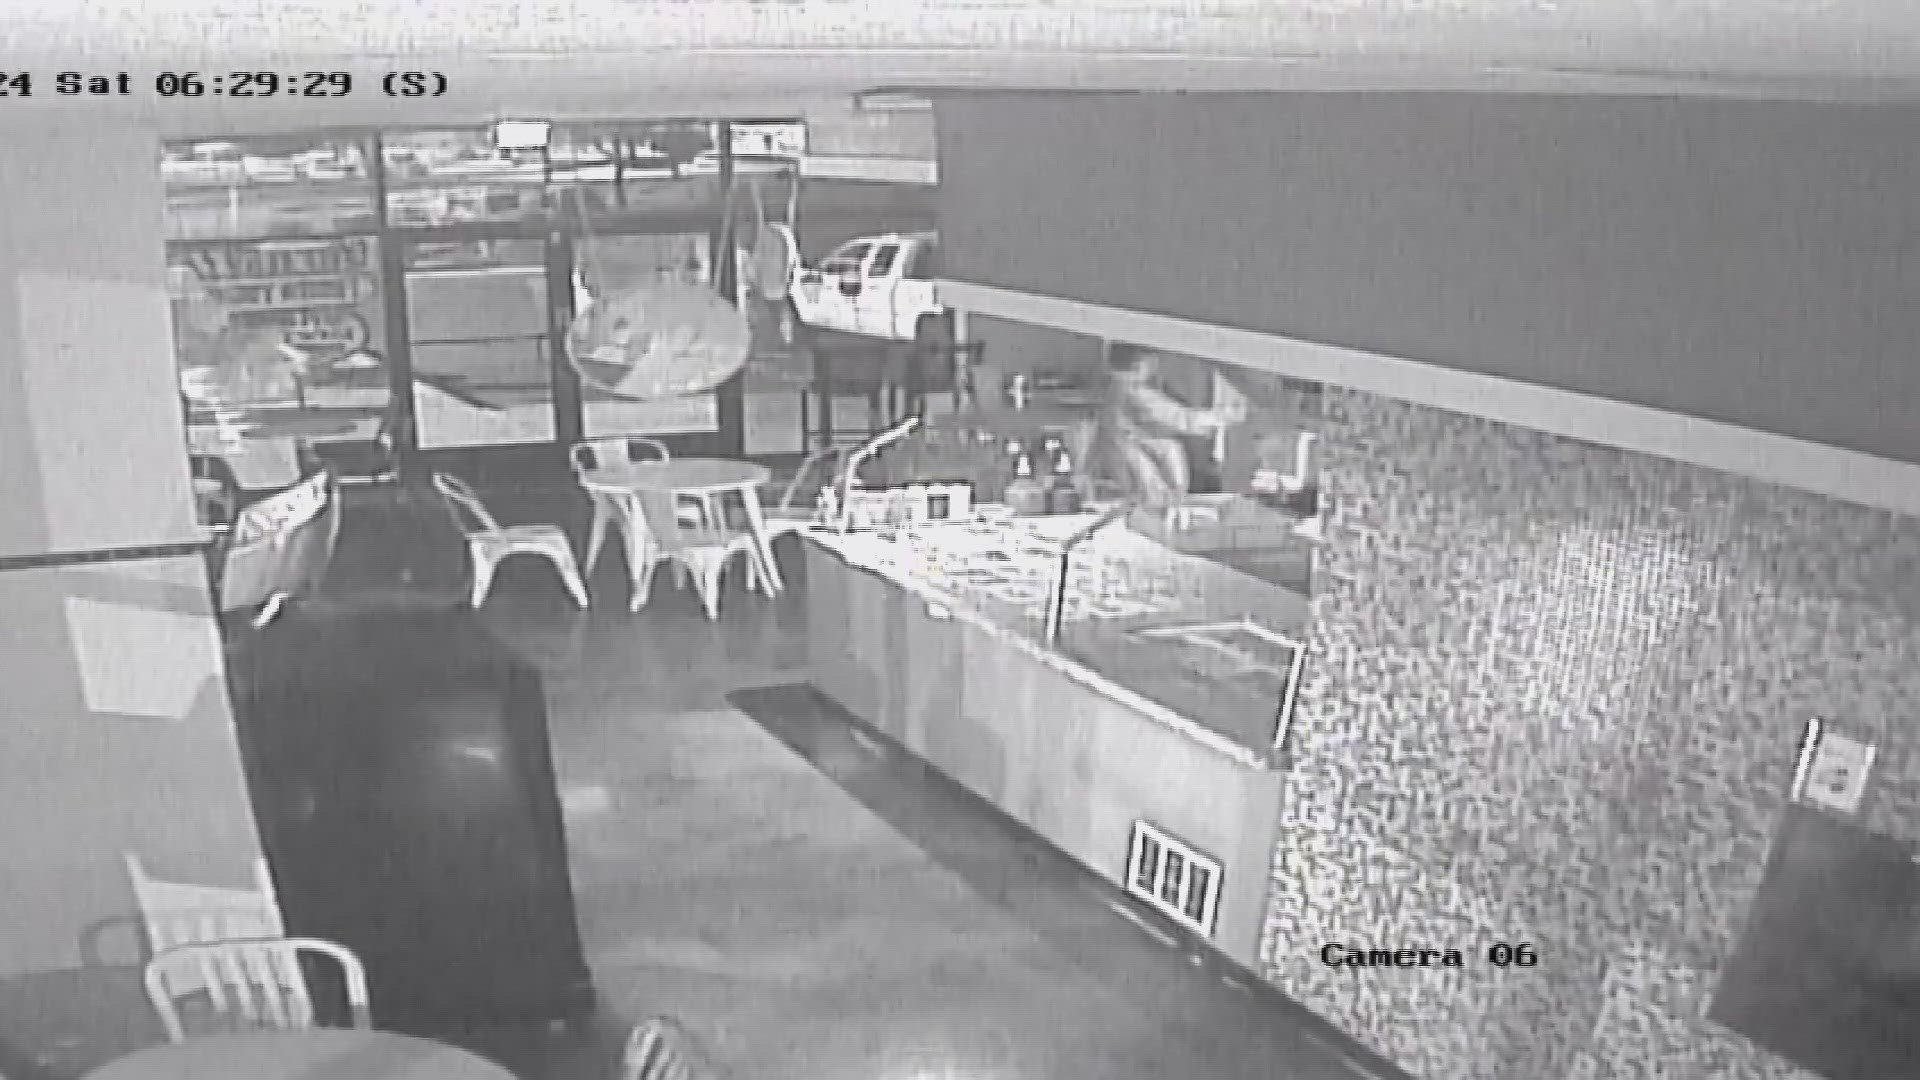 The break-ins began on March 23rd and have affected four businesses in Peoria. Watch the video above for more information.